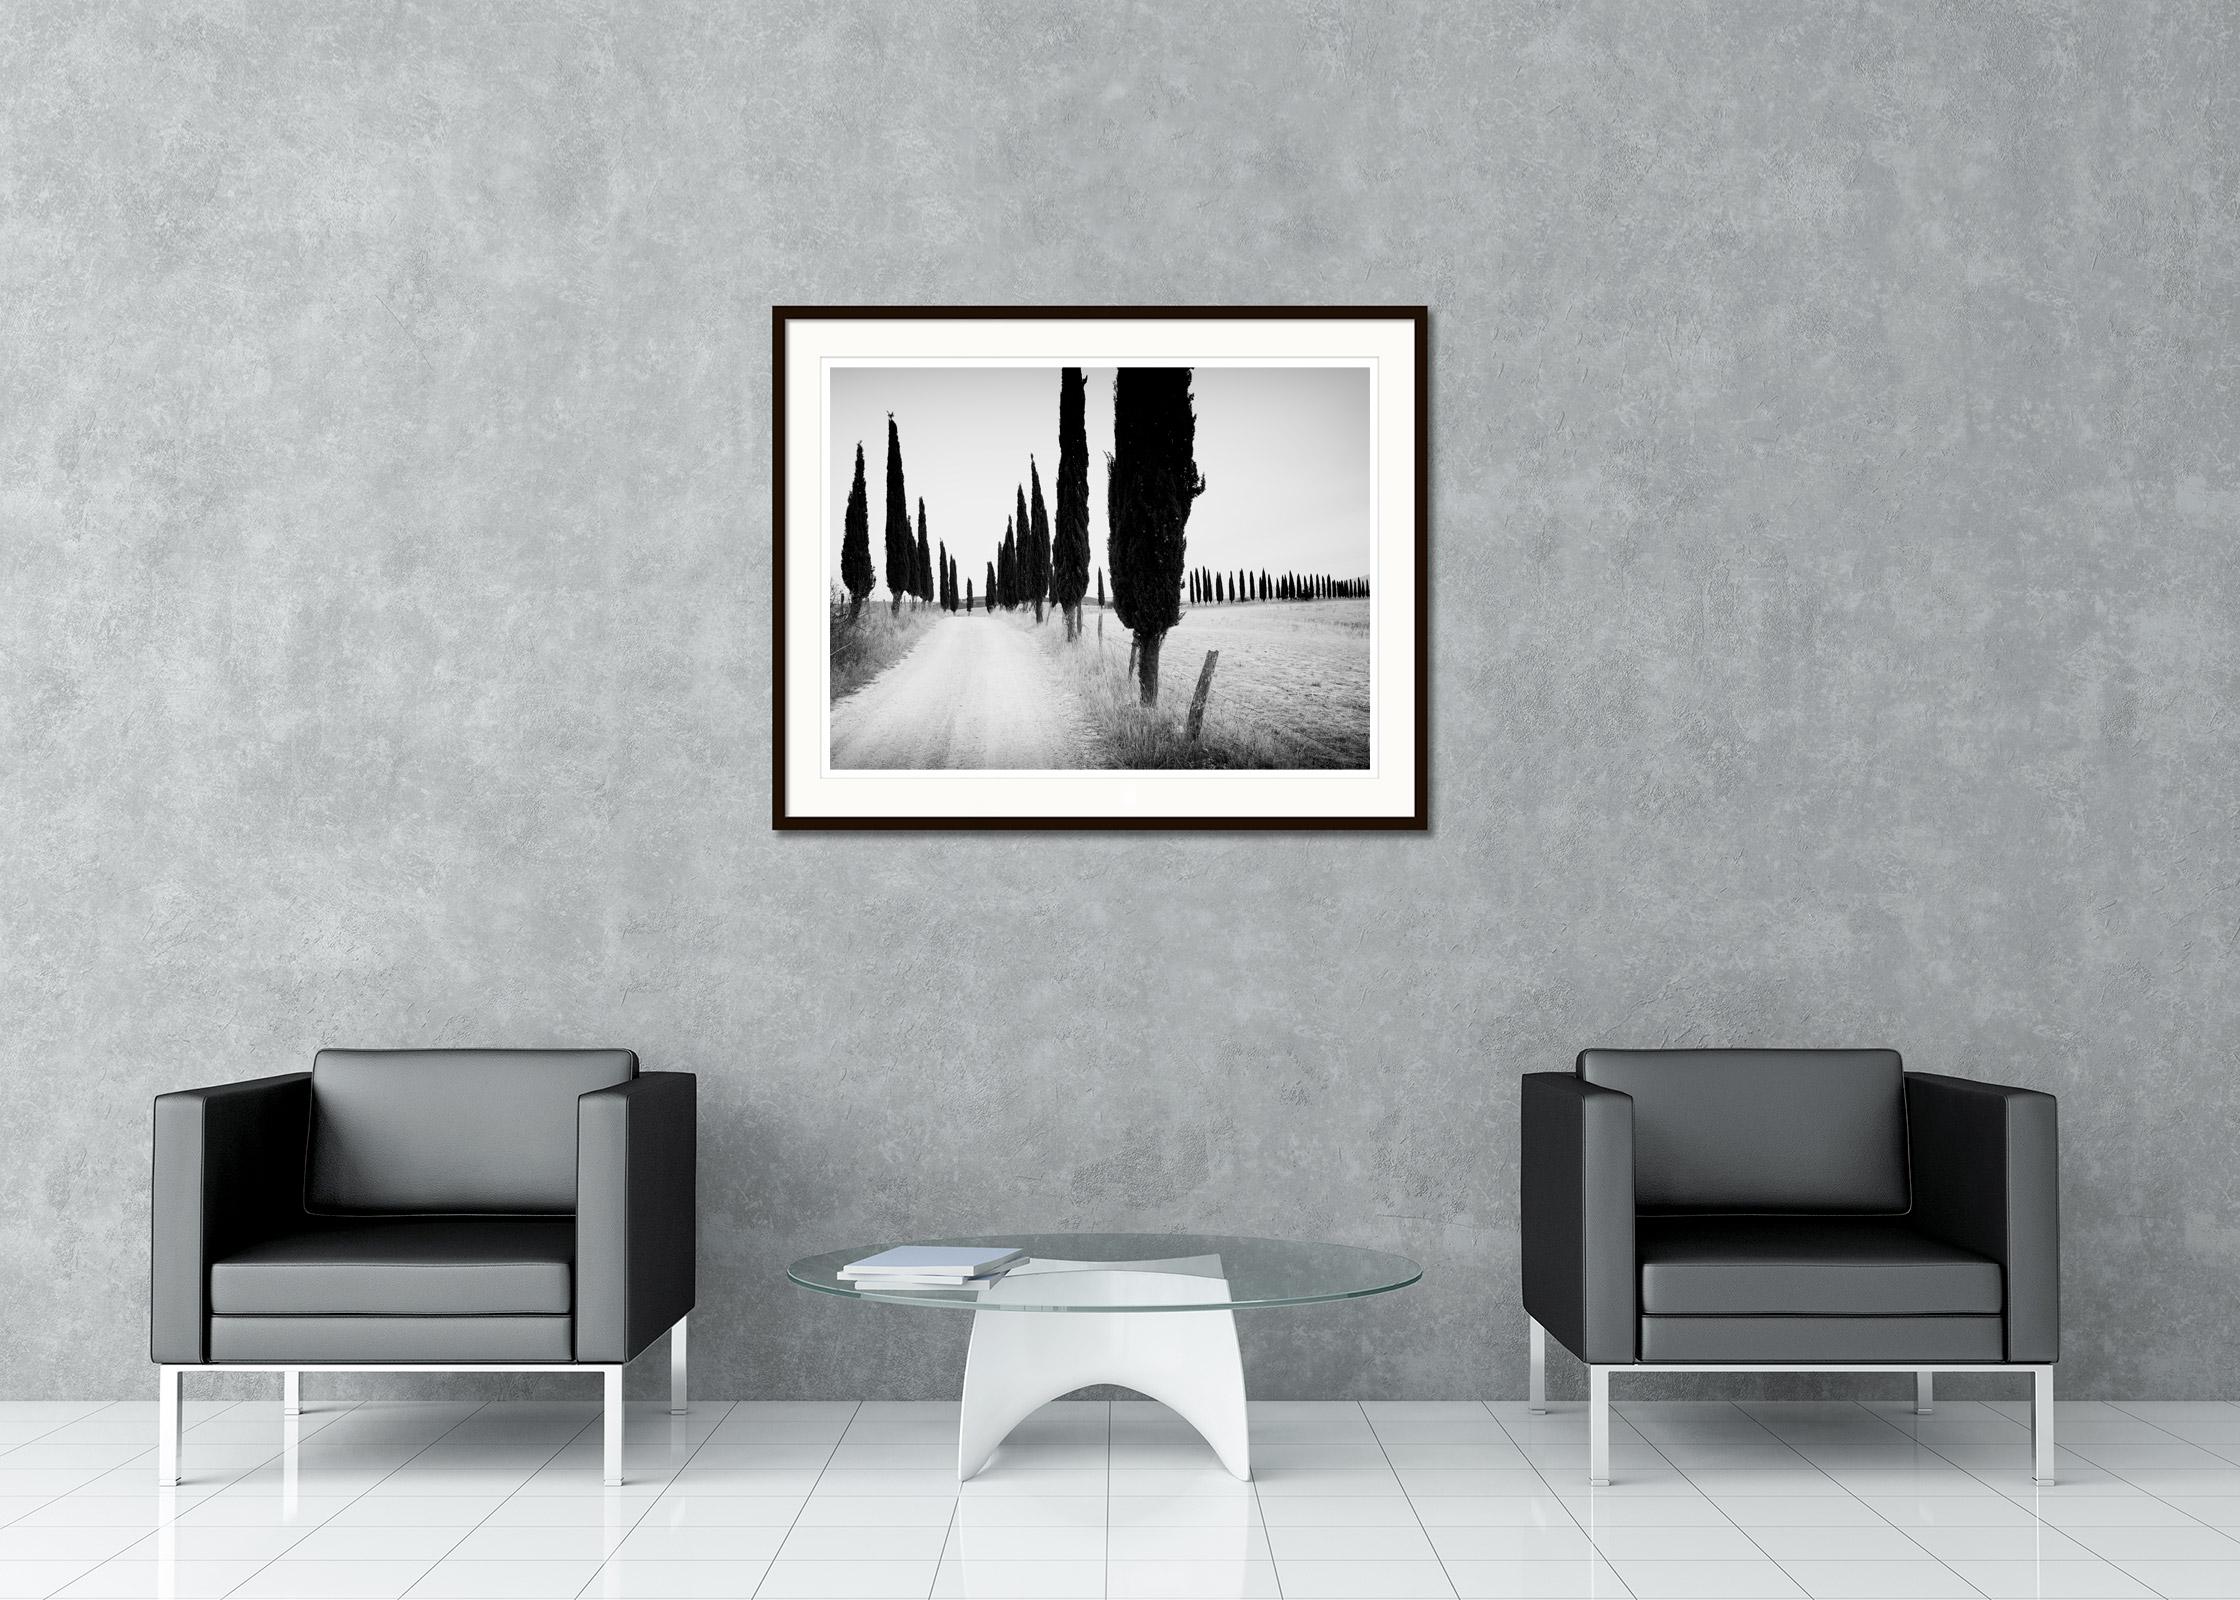 Cypress Tree Avenue, Tuscany, Italy, black and white photography, art landscape - Gray Landscape Photograph by Gerald Berghammer